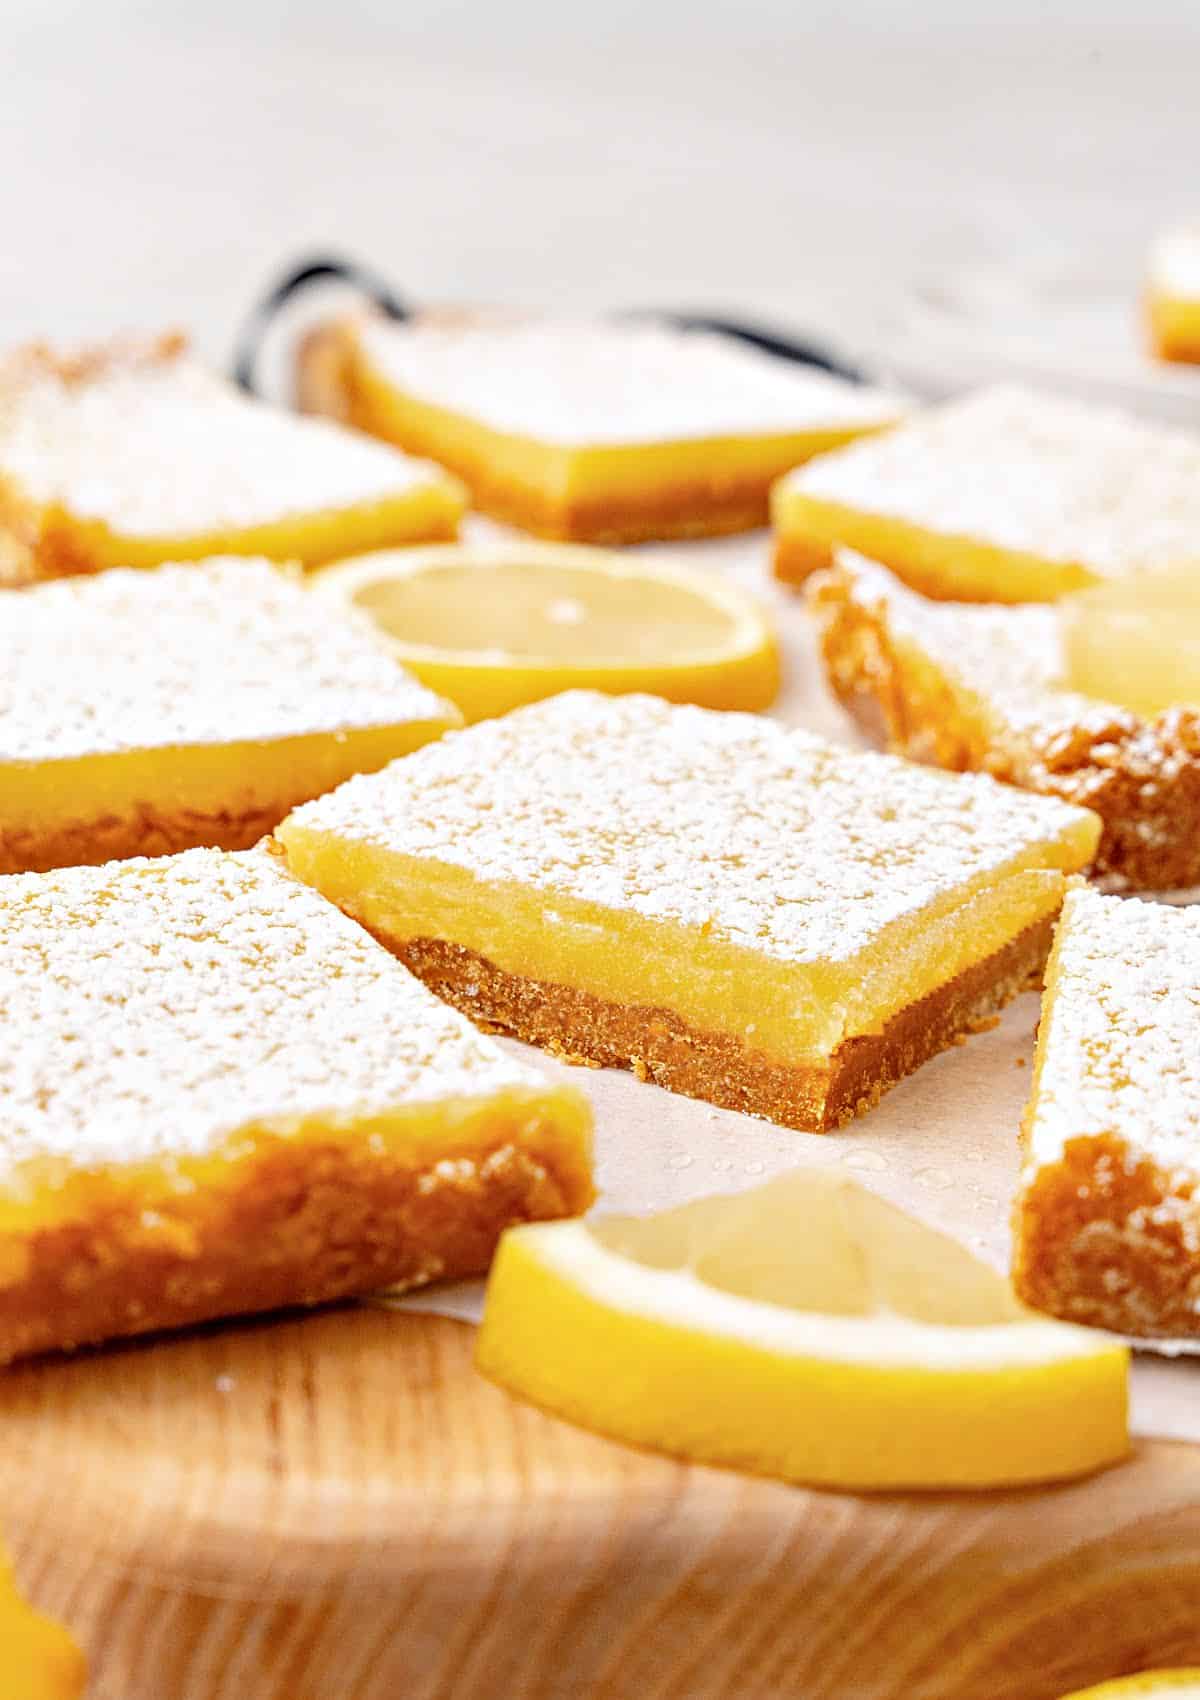 Wooden board with several lemon bars with powdered sugar. Light gray background.